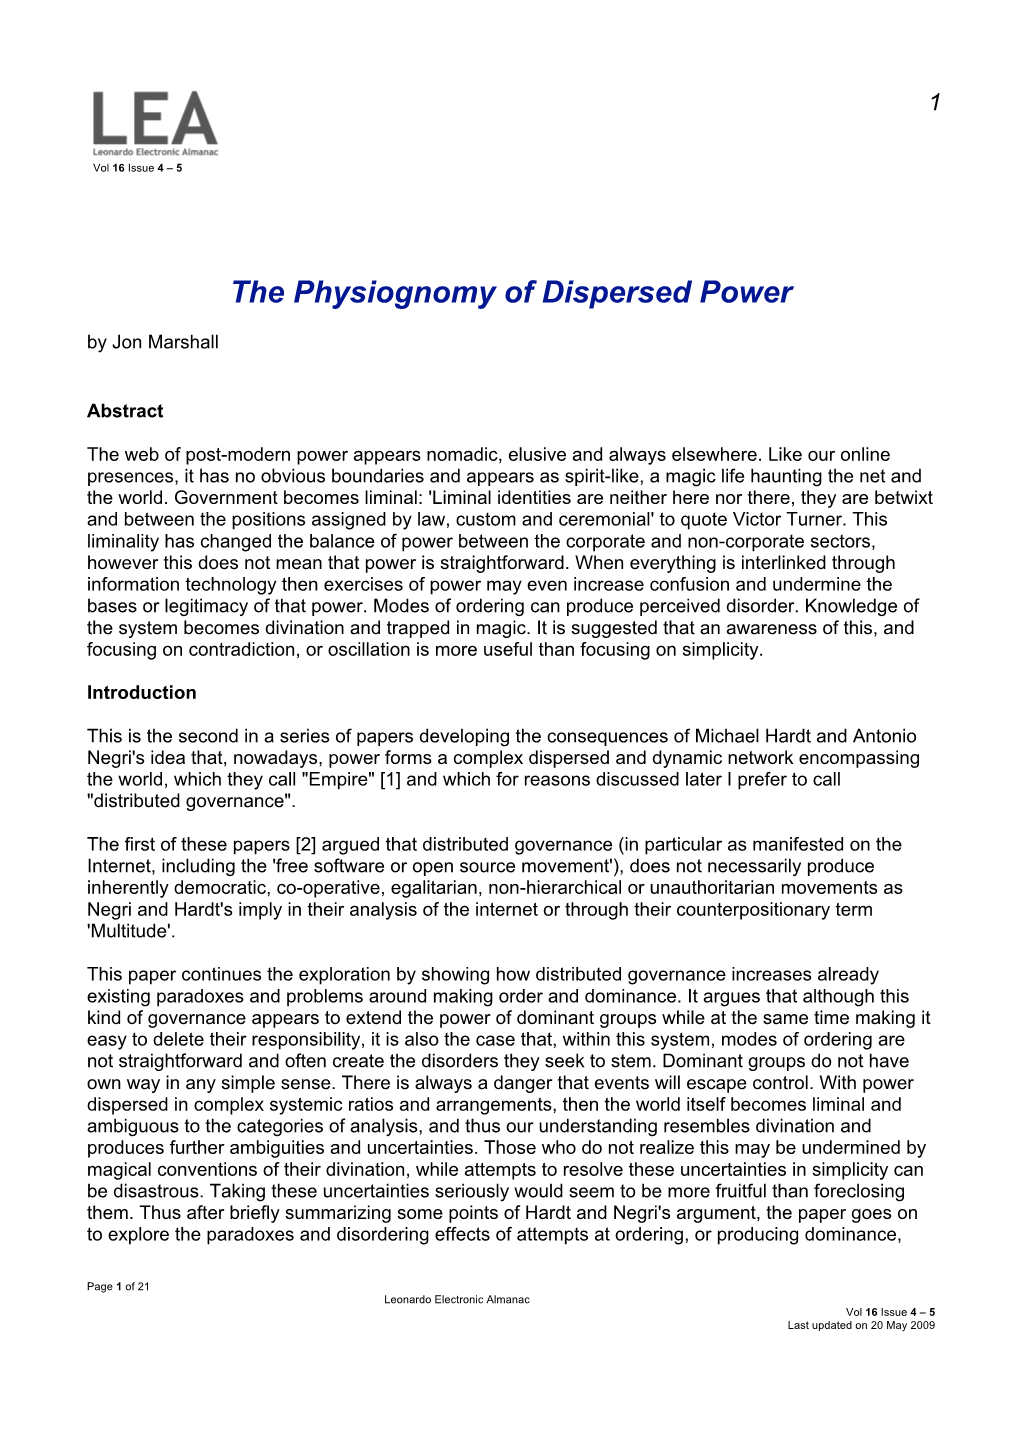 The Physiognomy of Dispersed Power by Jon Marshall